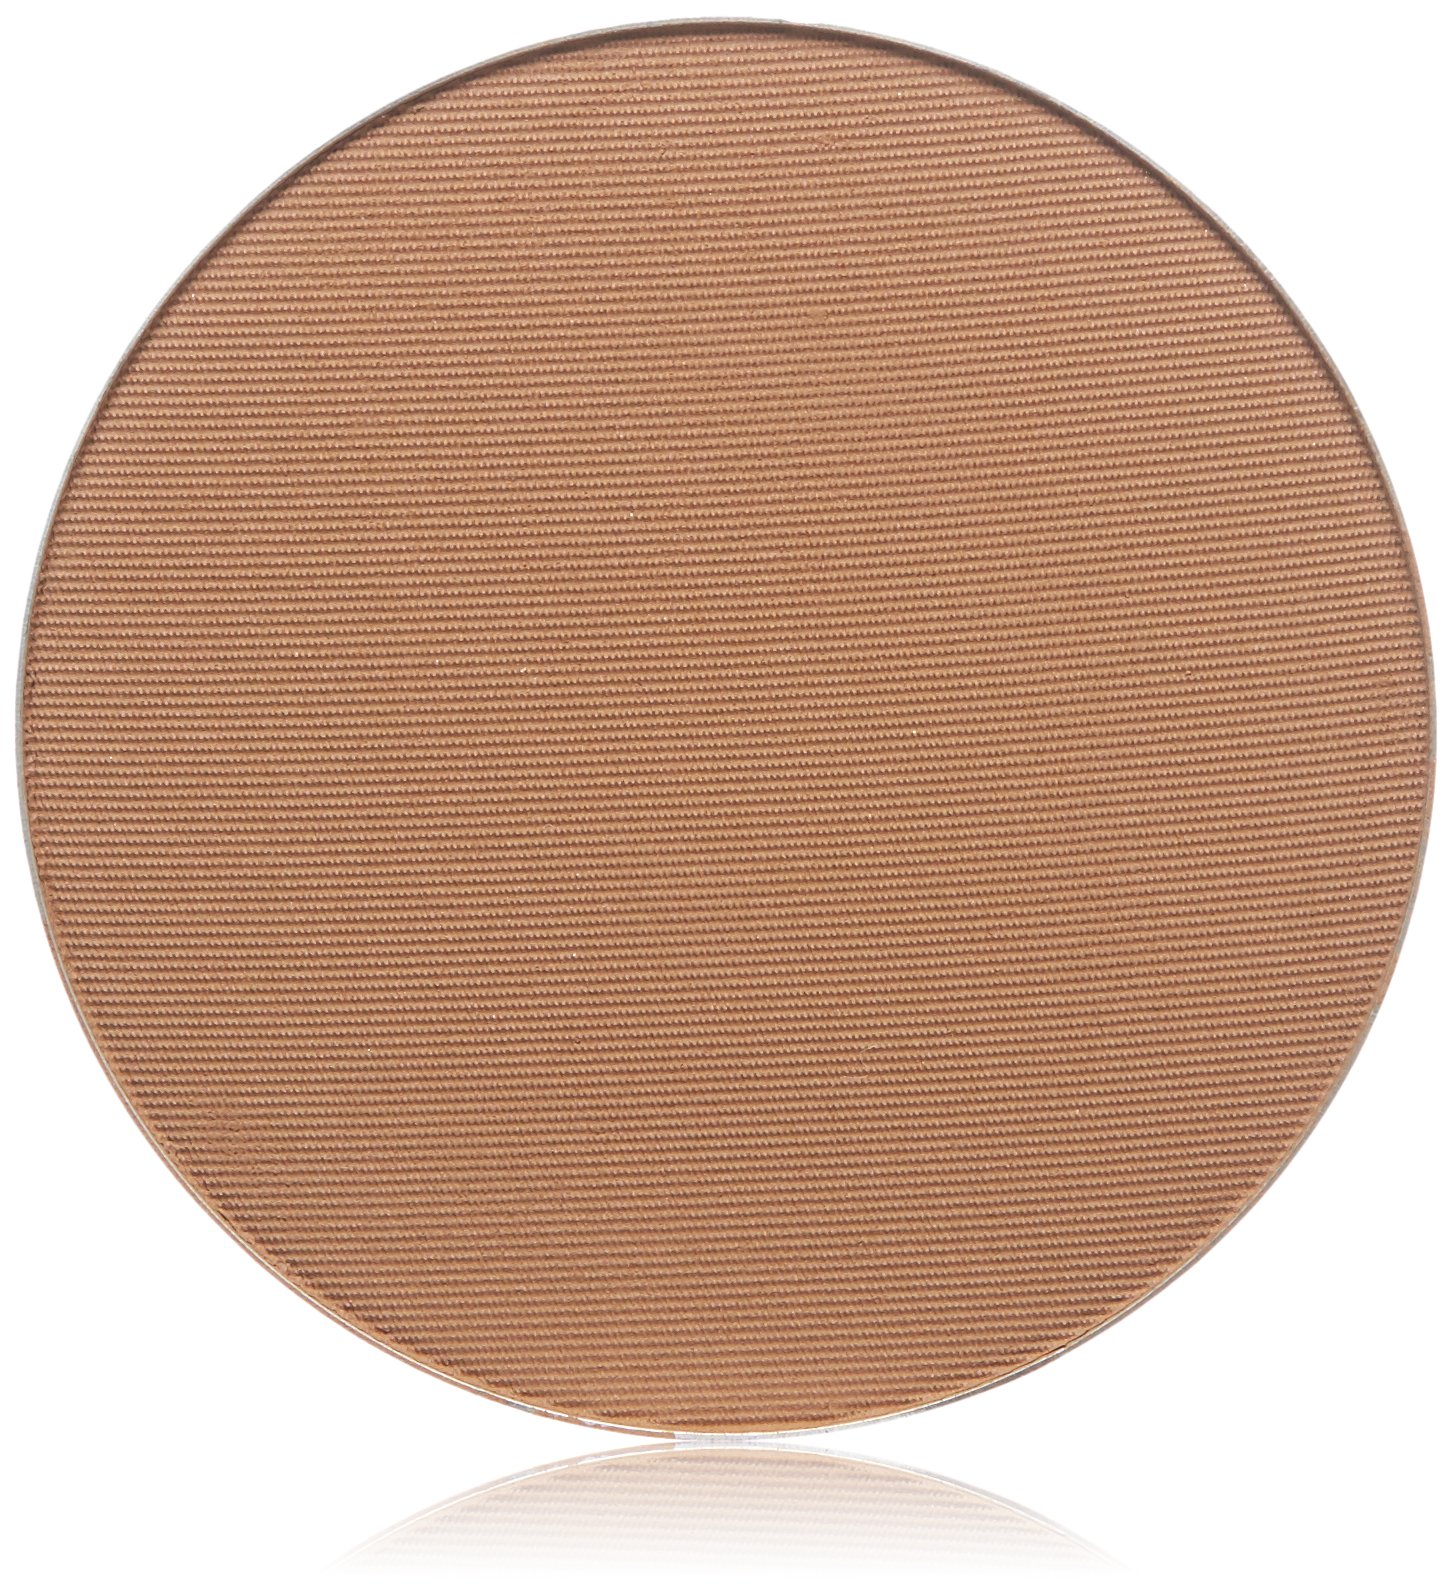 Osmosis Skincare Mineral Pressed Base Foundation Refill